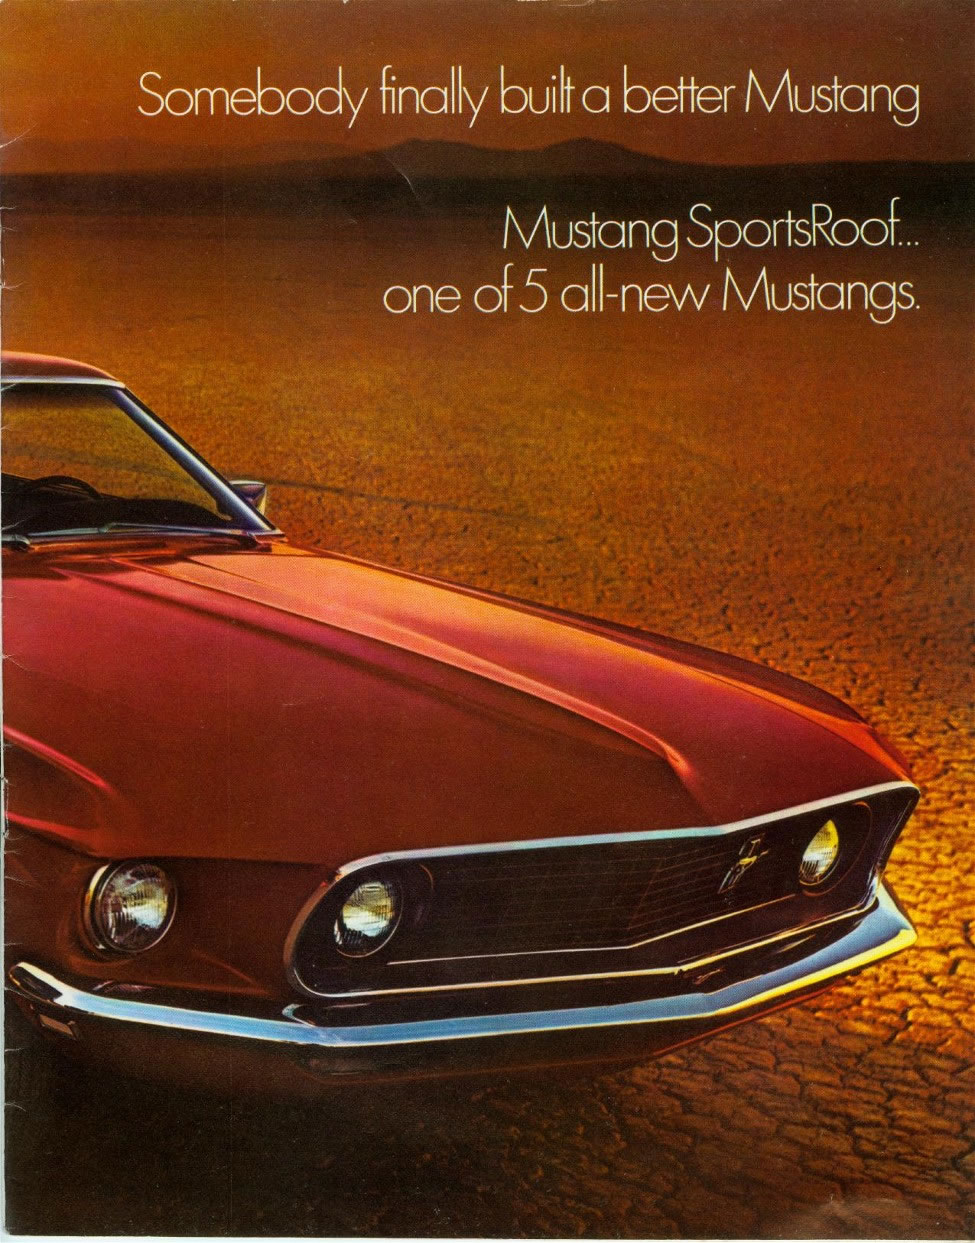 1969_Ford_Mustang-03